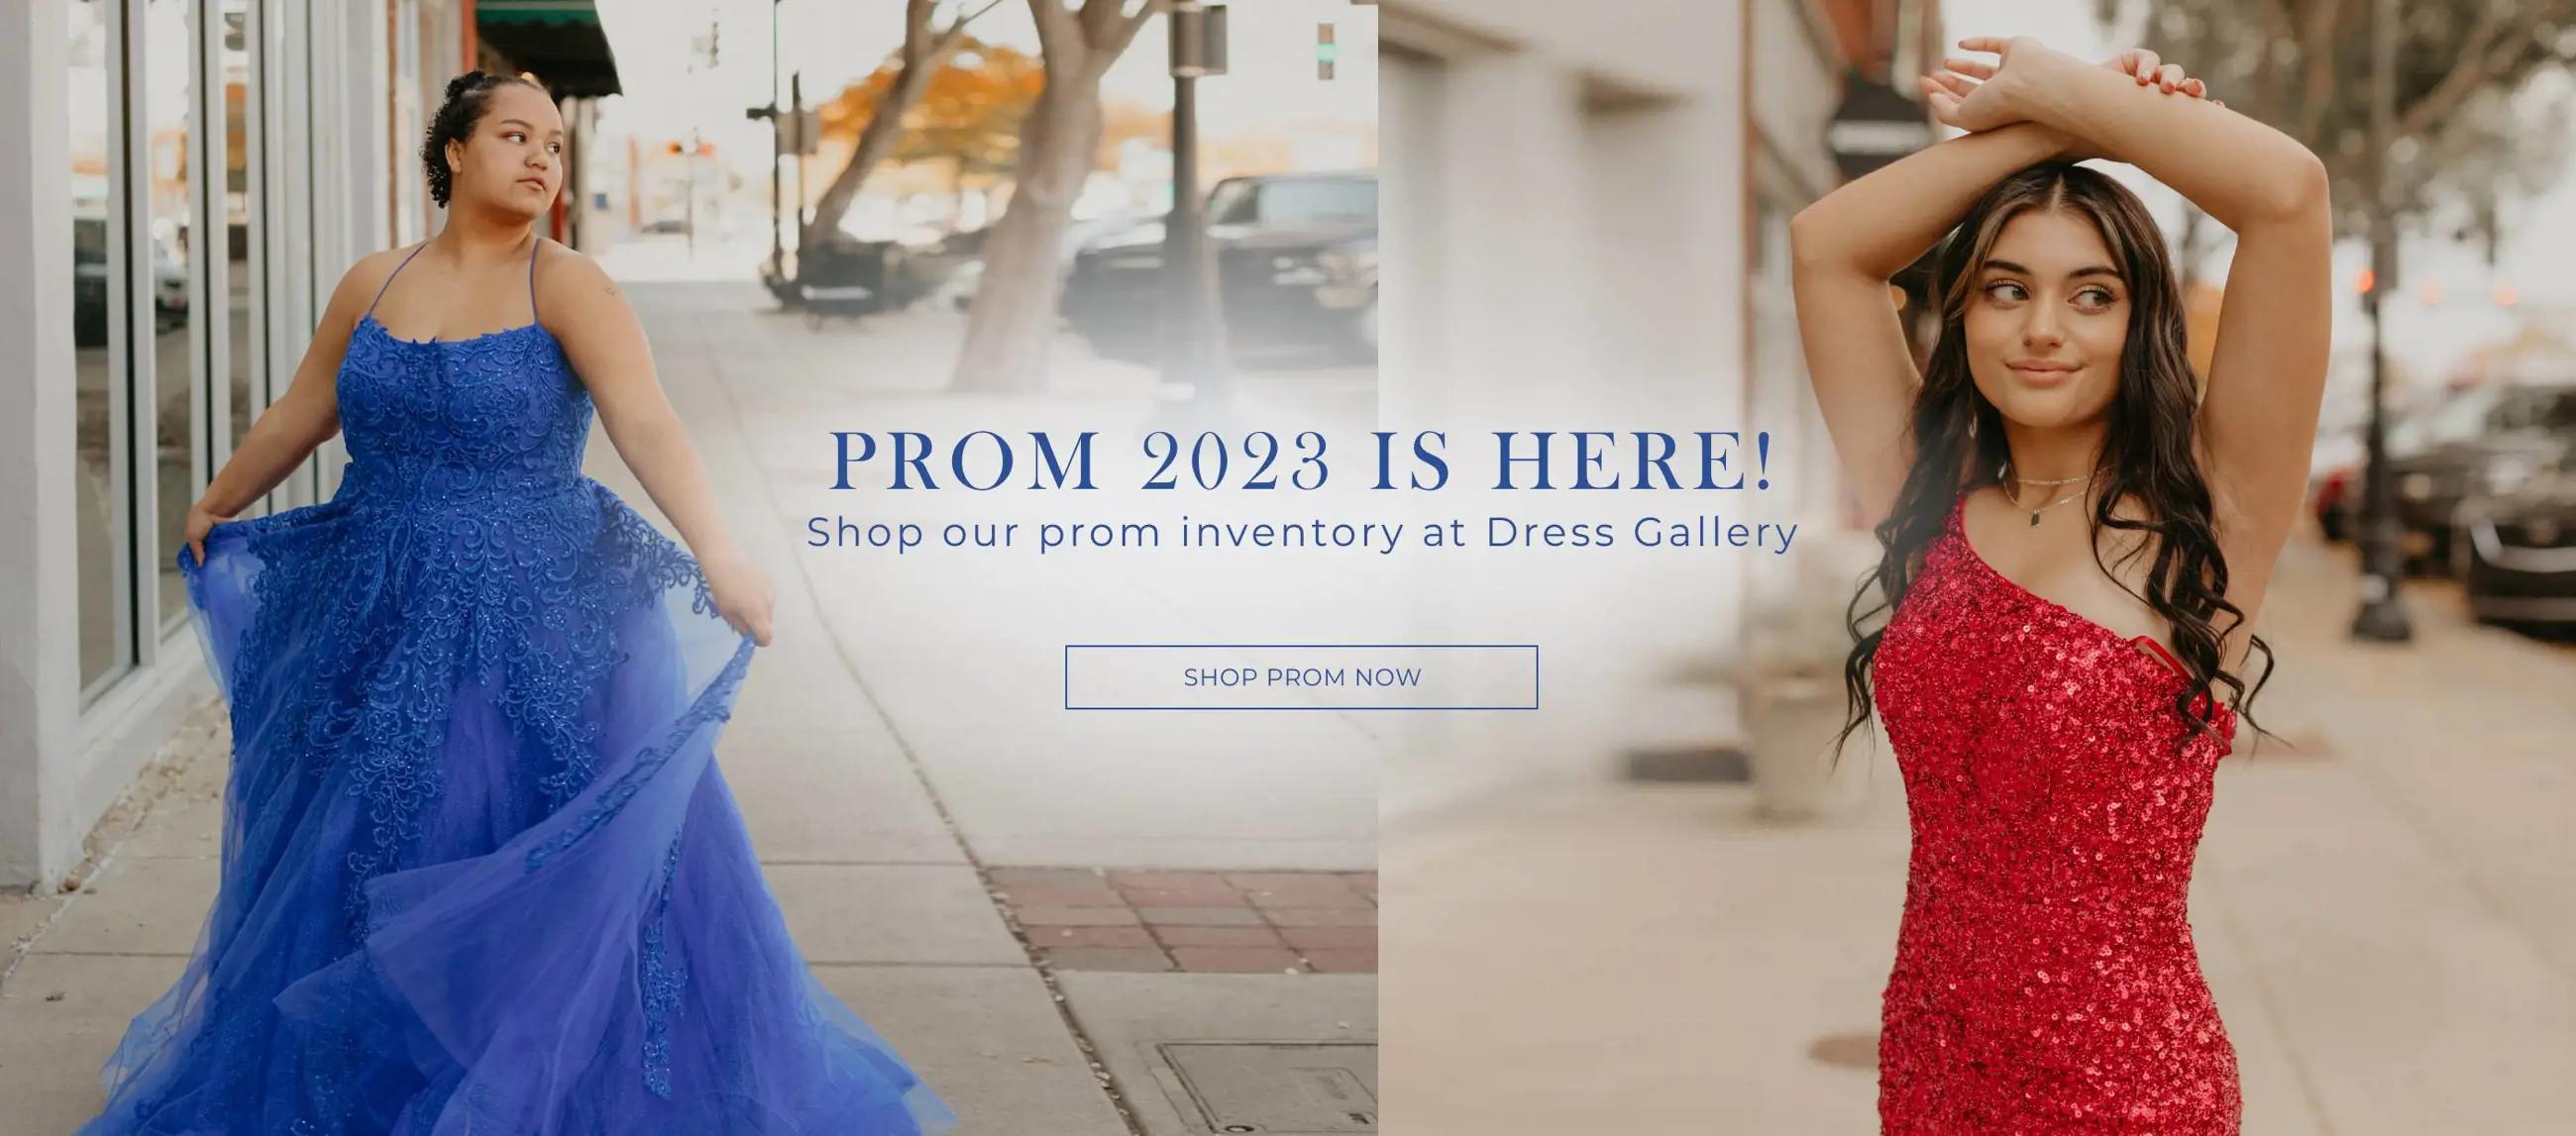 <span class="sr-only">Prom 2023 is here</span>